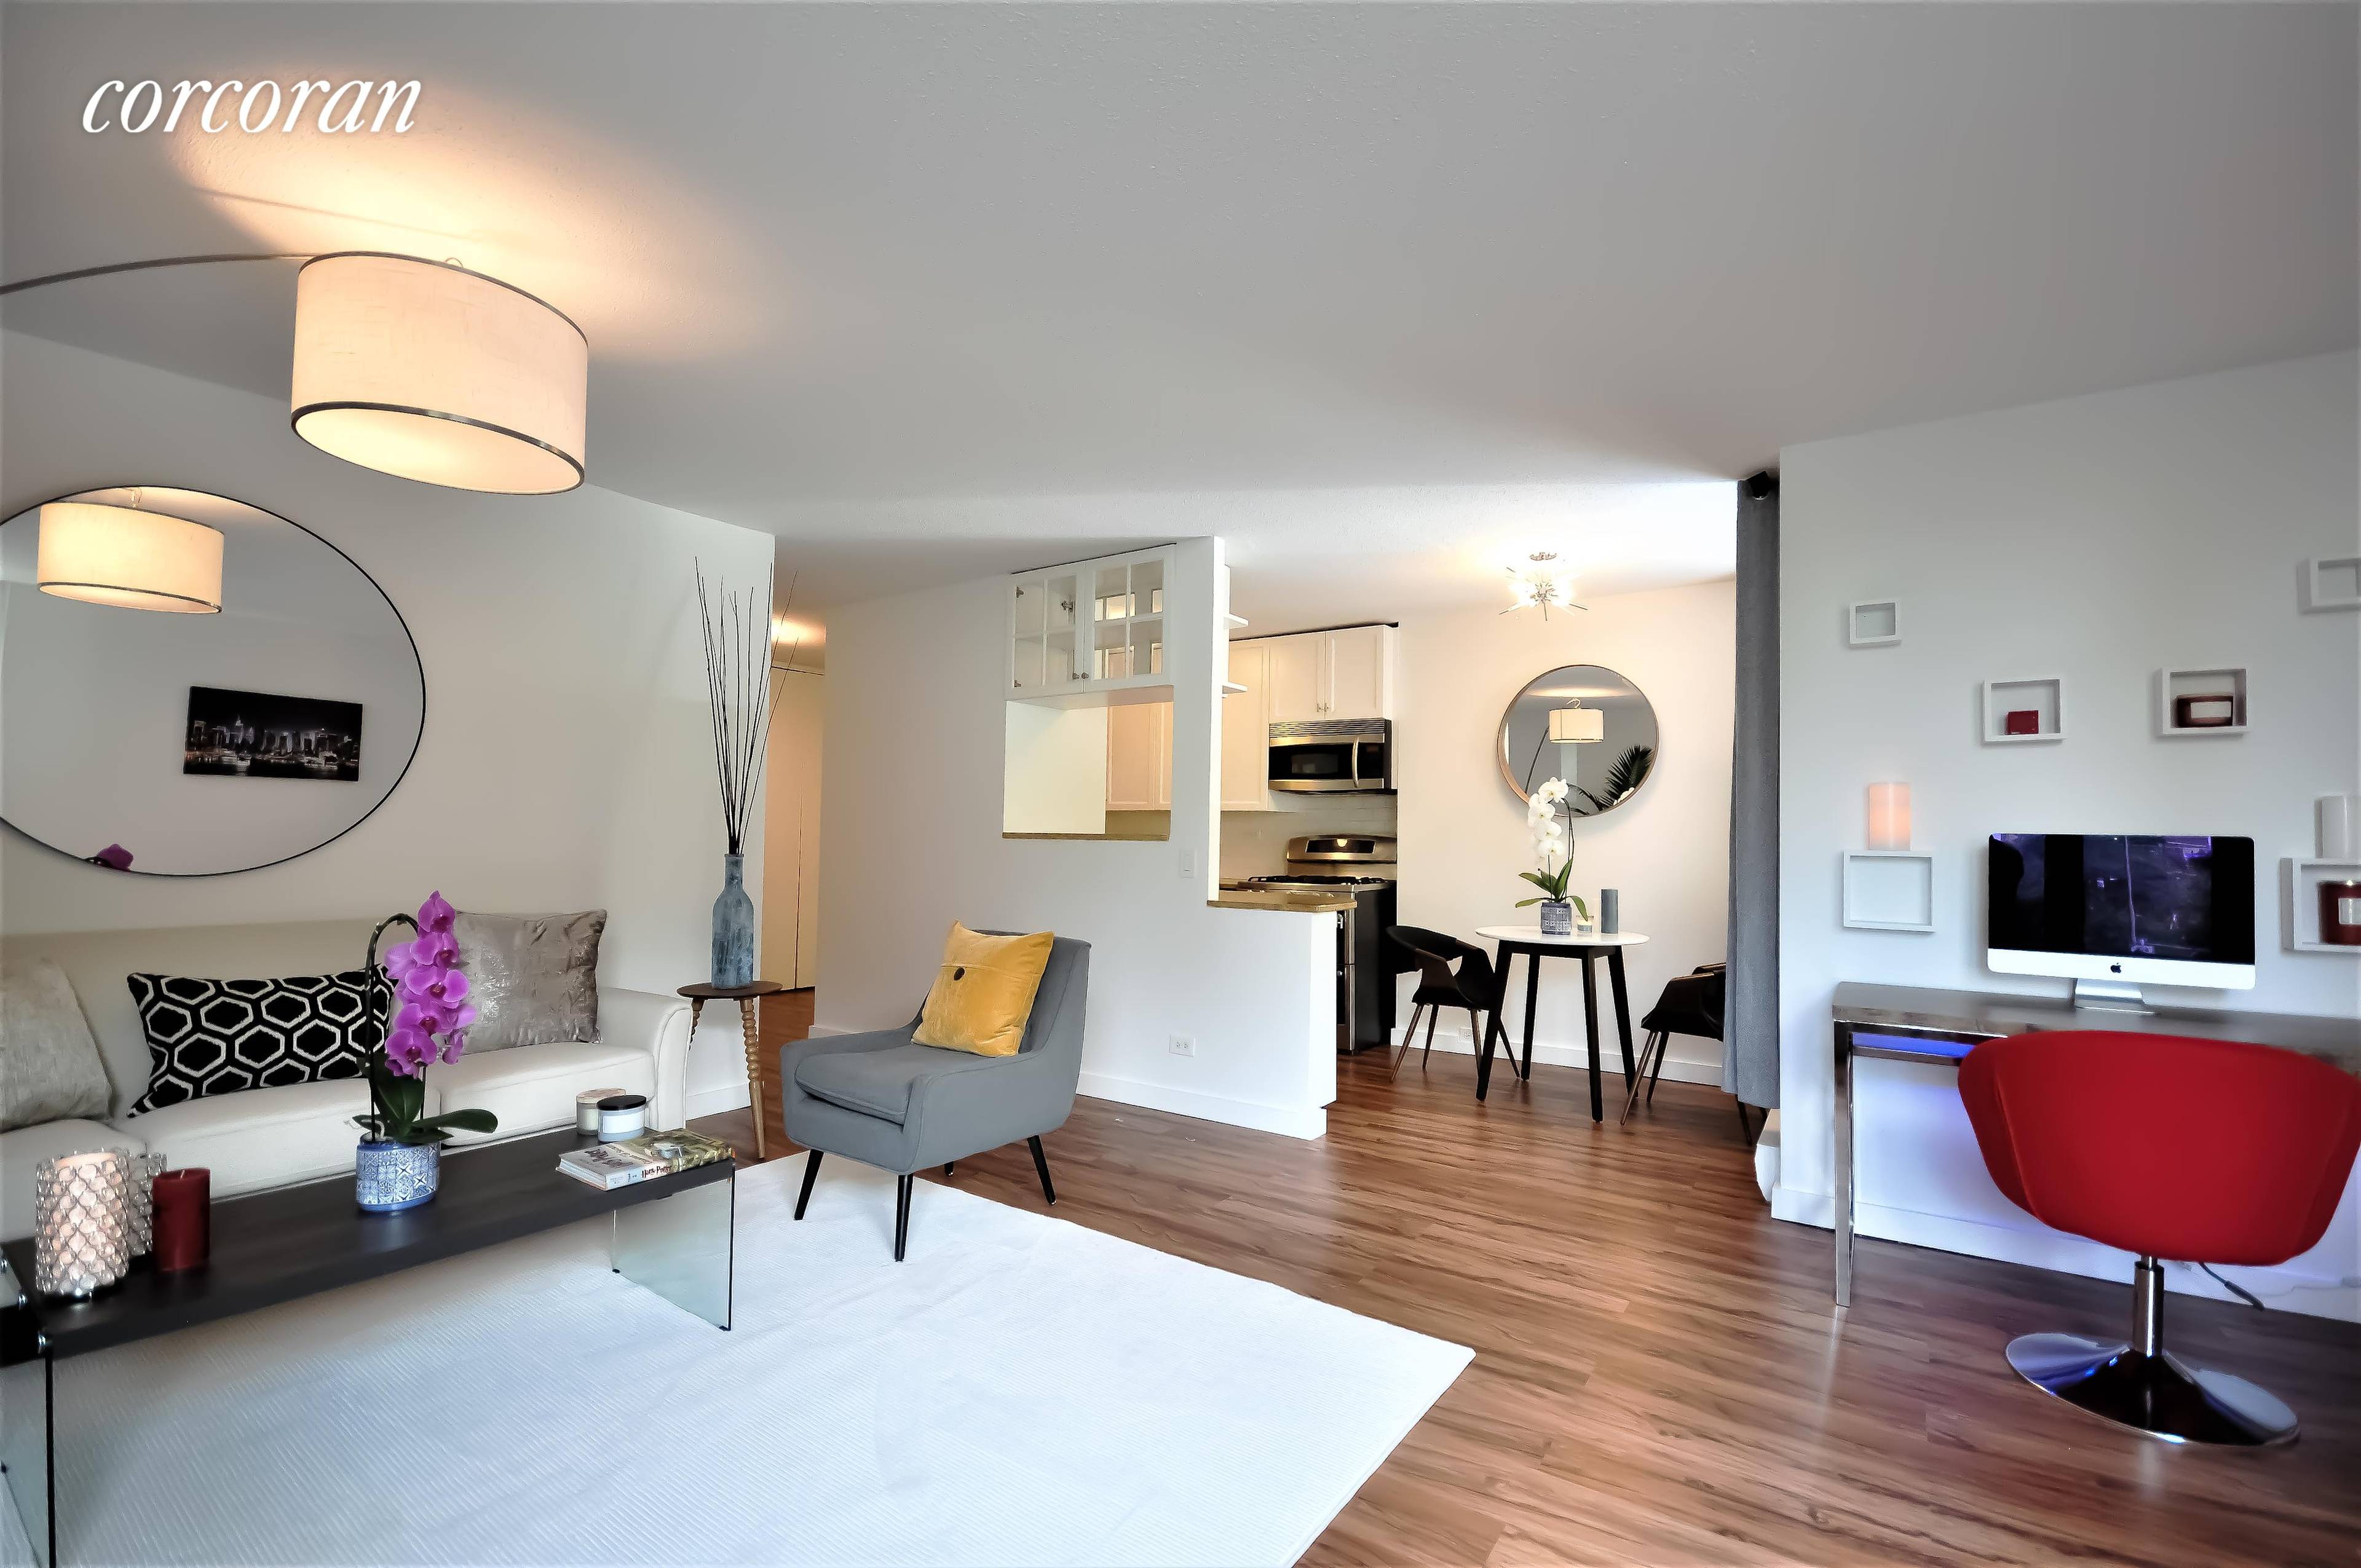 Best value, renovated two bedrooms two bathroom Condo apartment that can easily be converted to a three bedroom home.